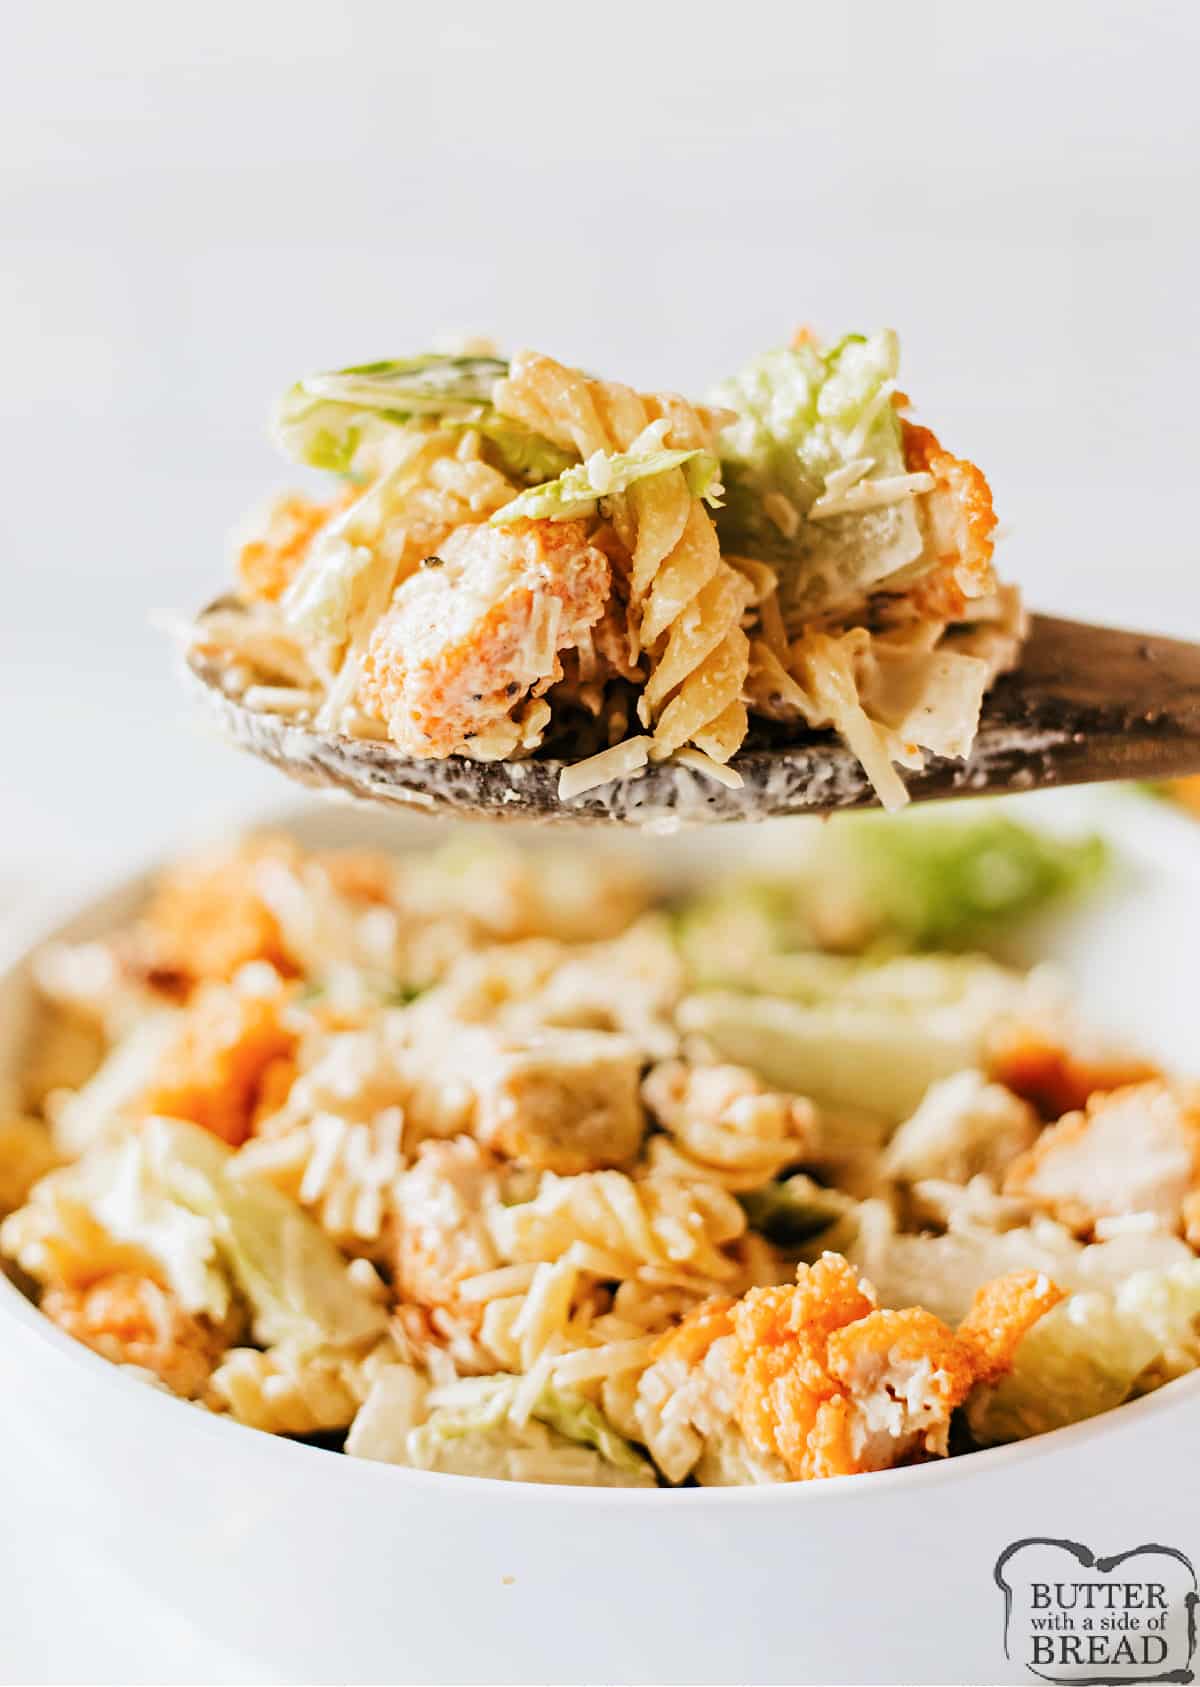 Chicken Caesar Pasta Salad is a great way to turn a salad into a filling main dish! This Caesar salad recipe is made with rotini, crispy chicken tenders, and shredded parmesan.